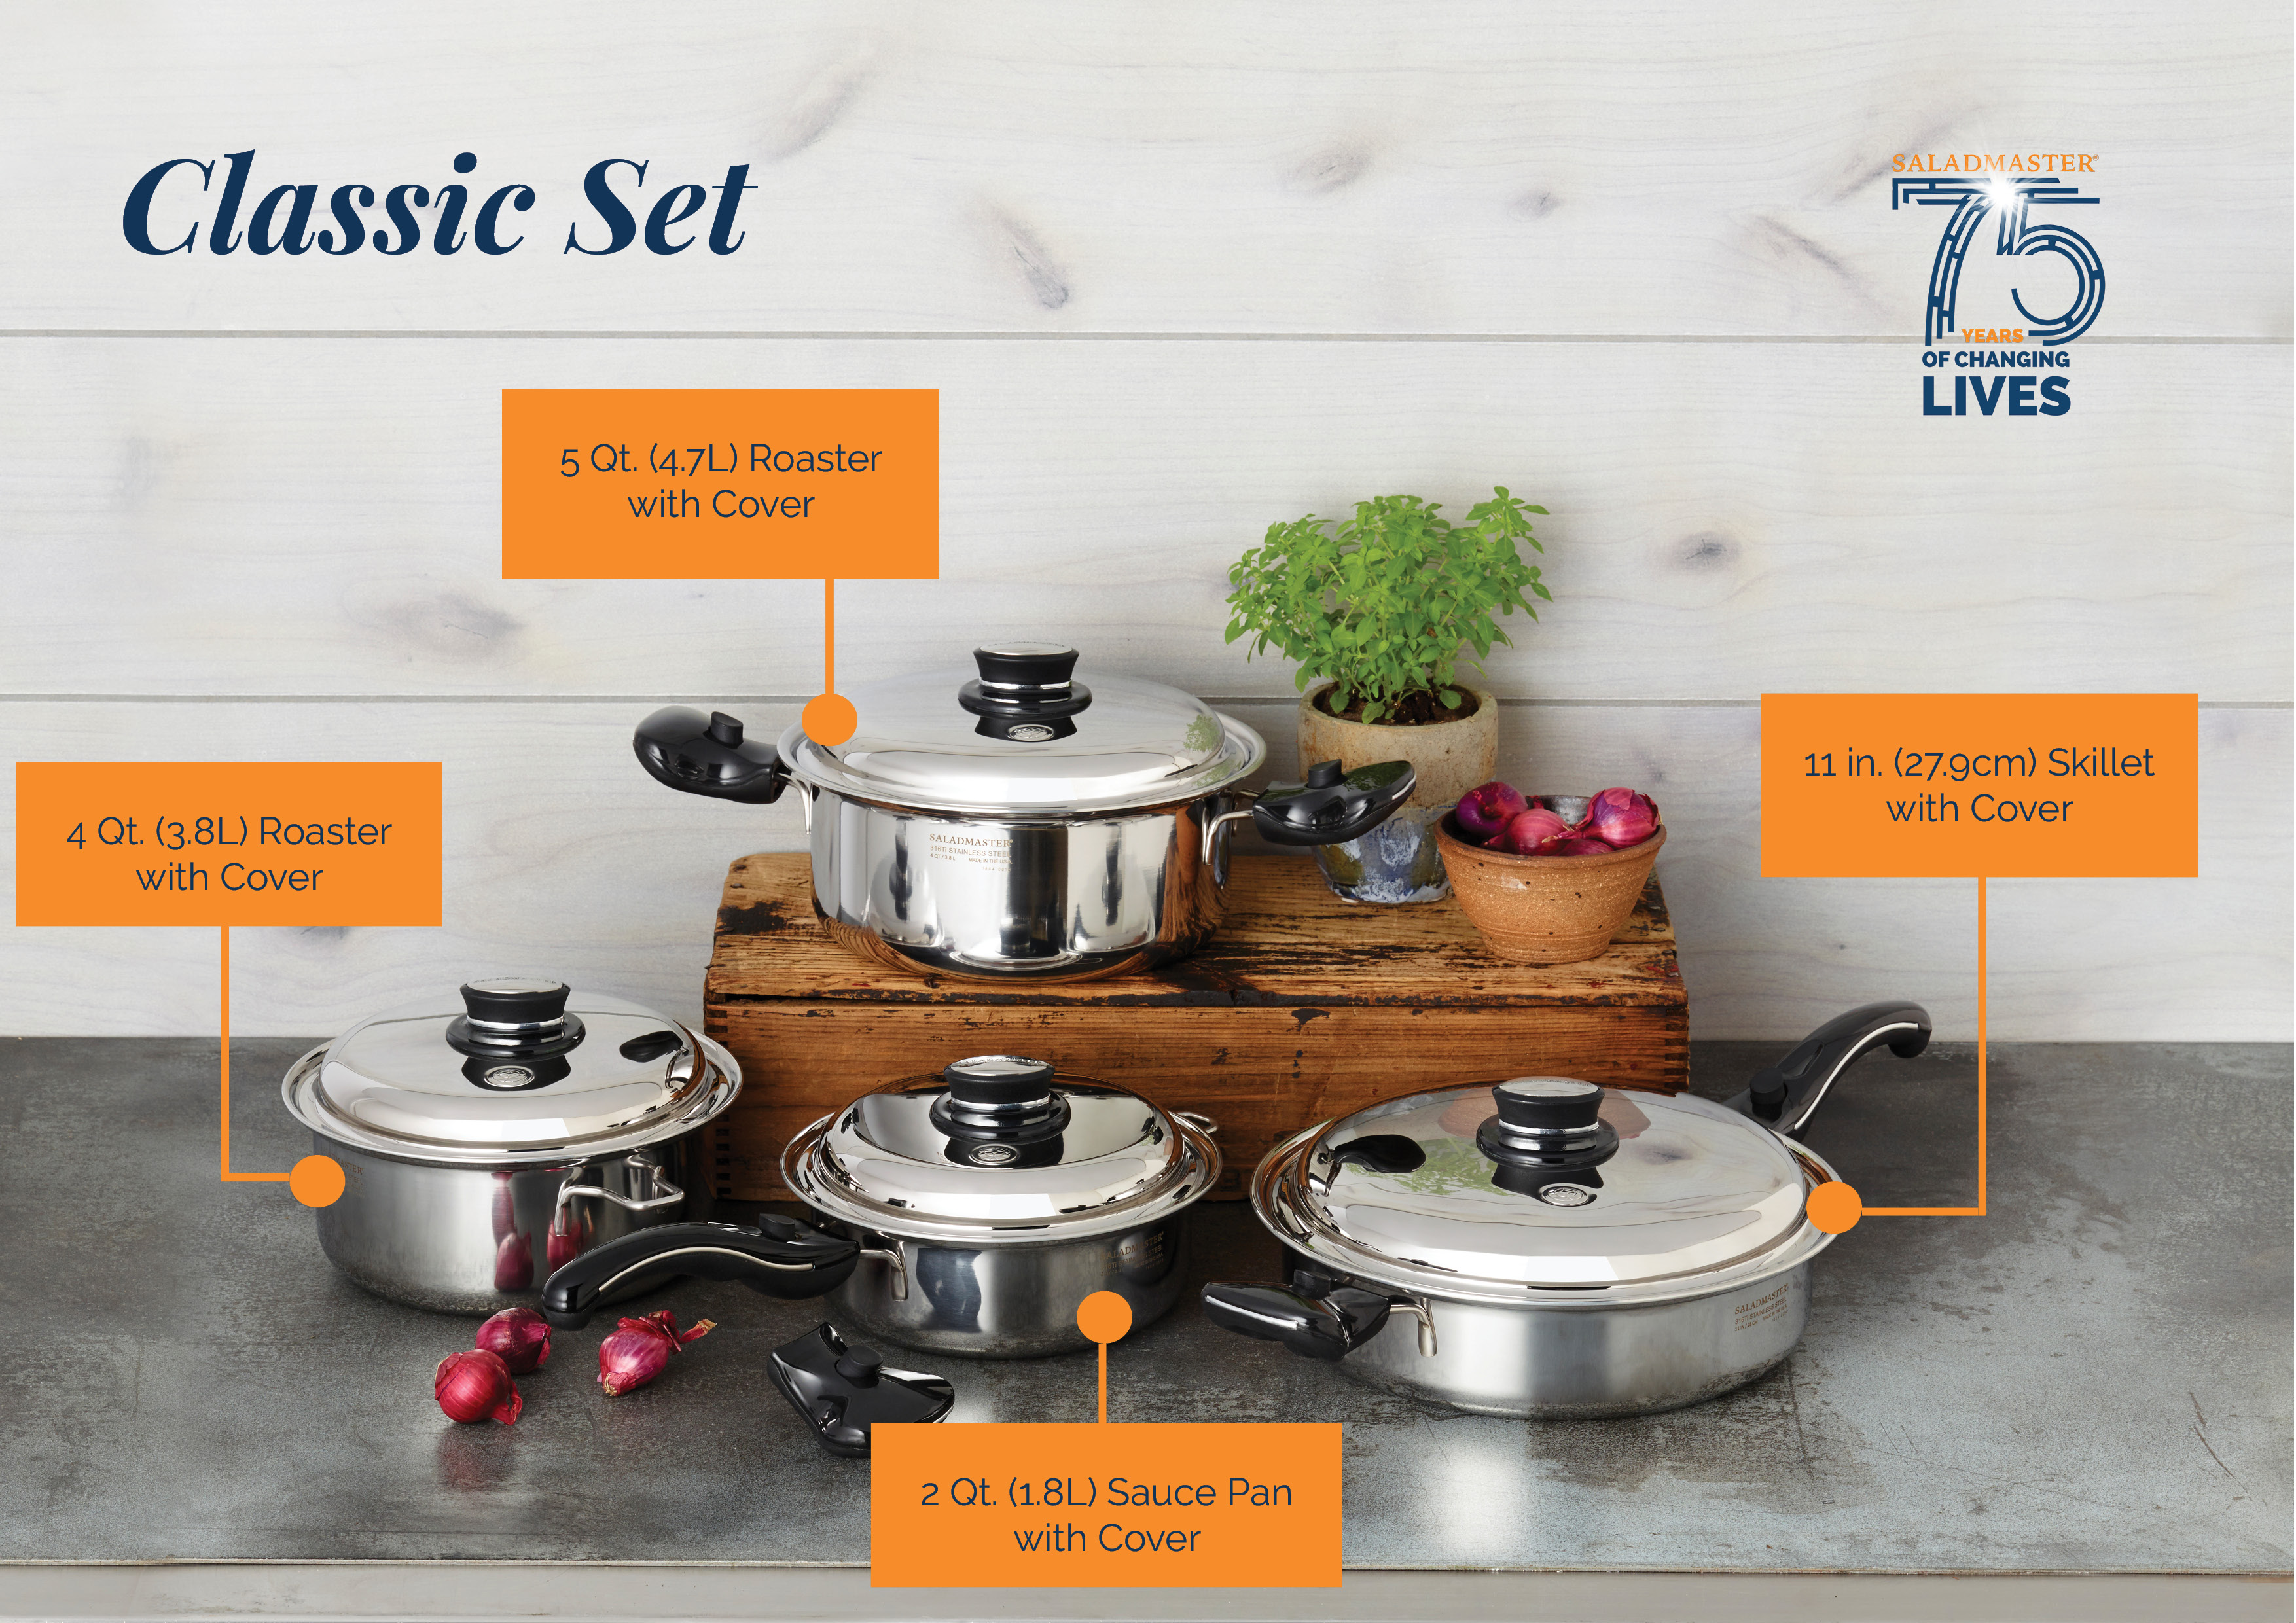 Meet our Classic Set for Your Everyday Cooking Needs